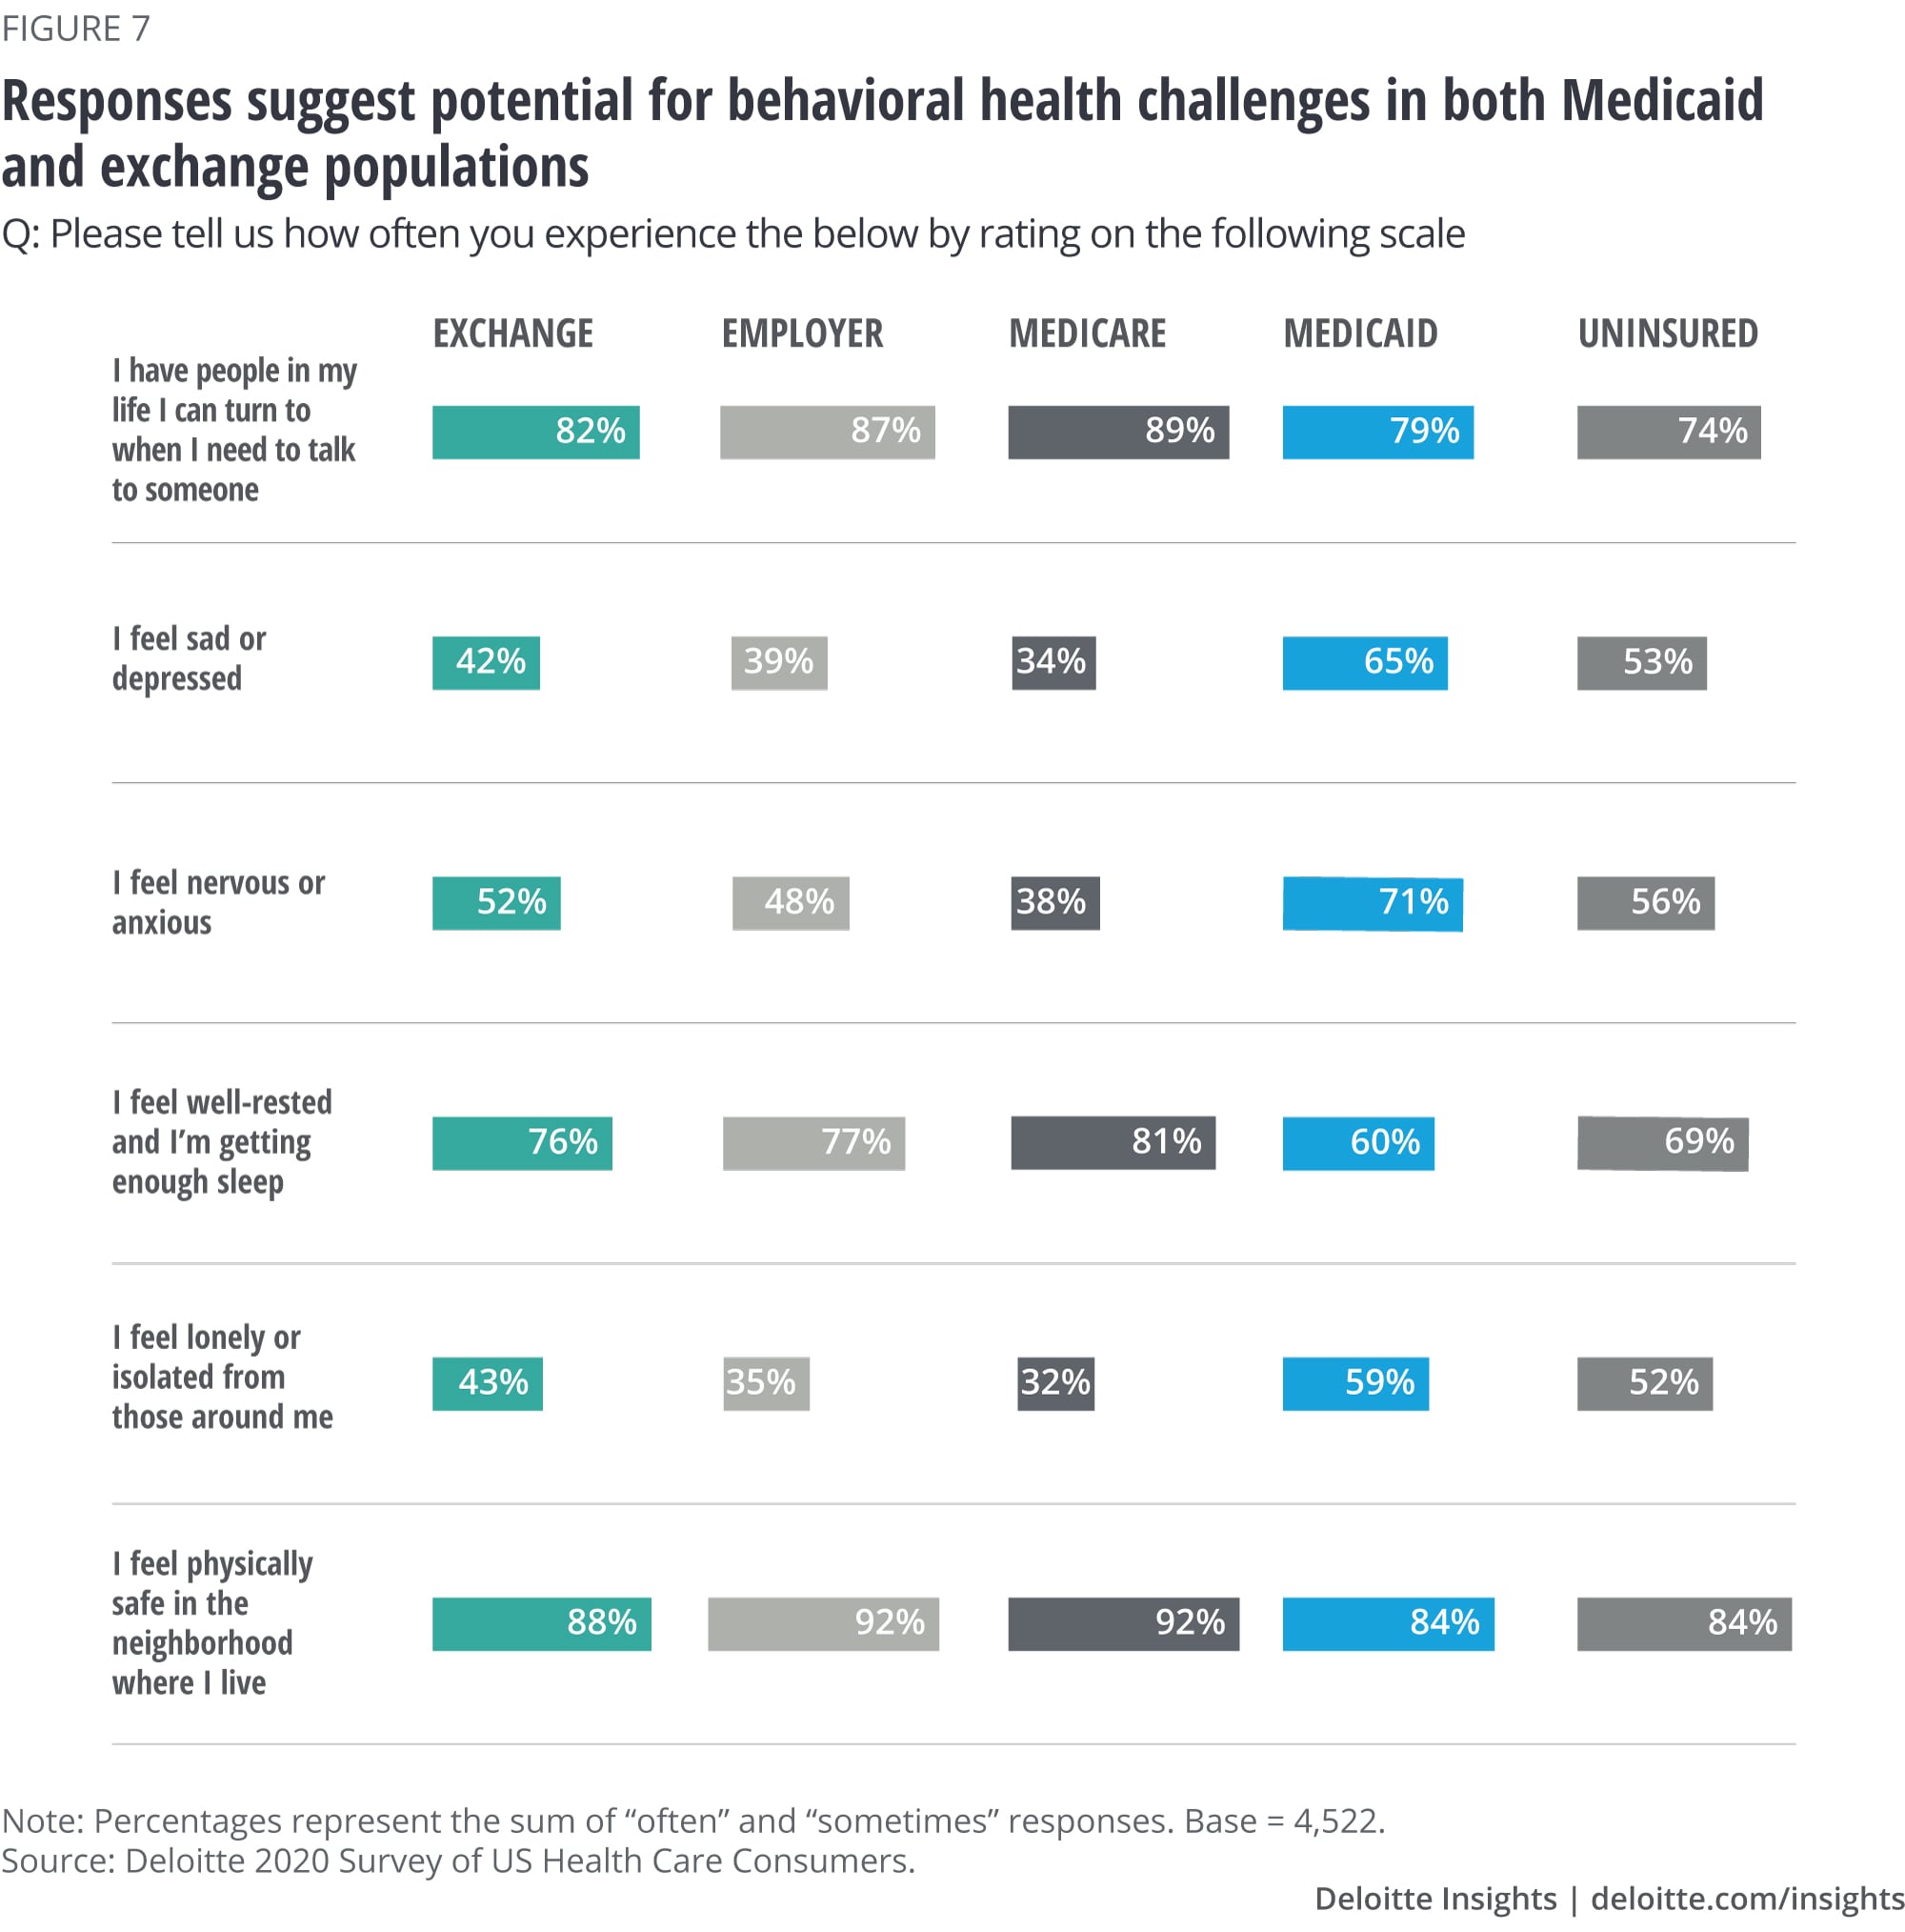 Responses suggest potential for behavioral health challenges in both Medicaid and exchange populations